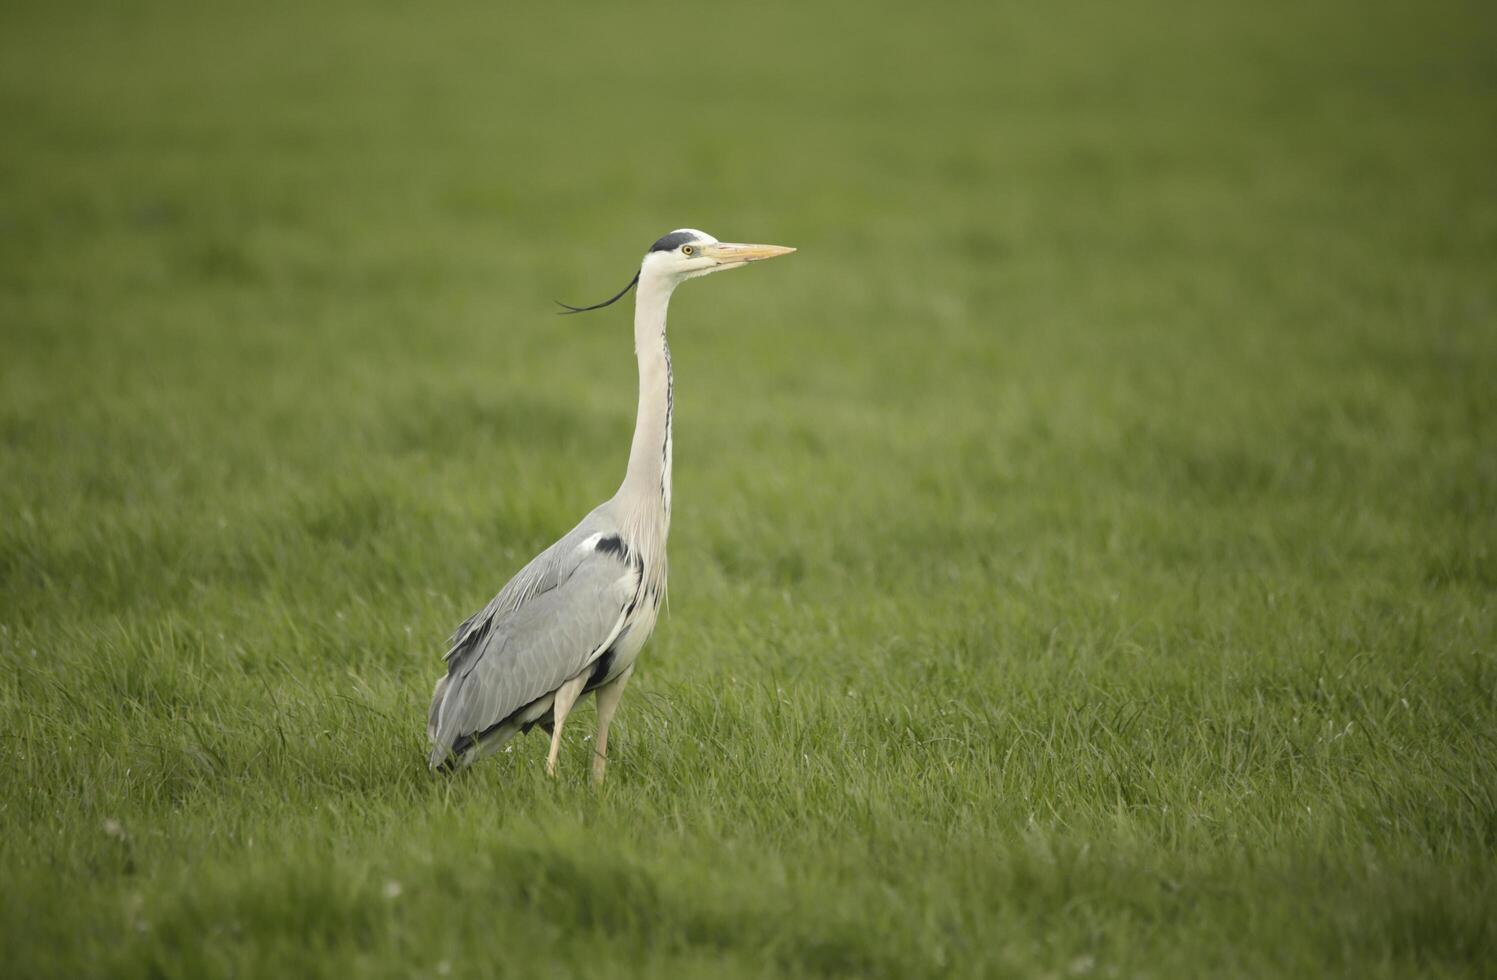 grey heron stands in the grassland photo